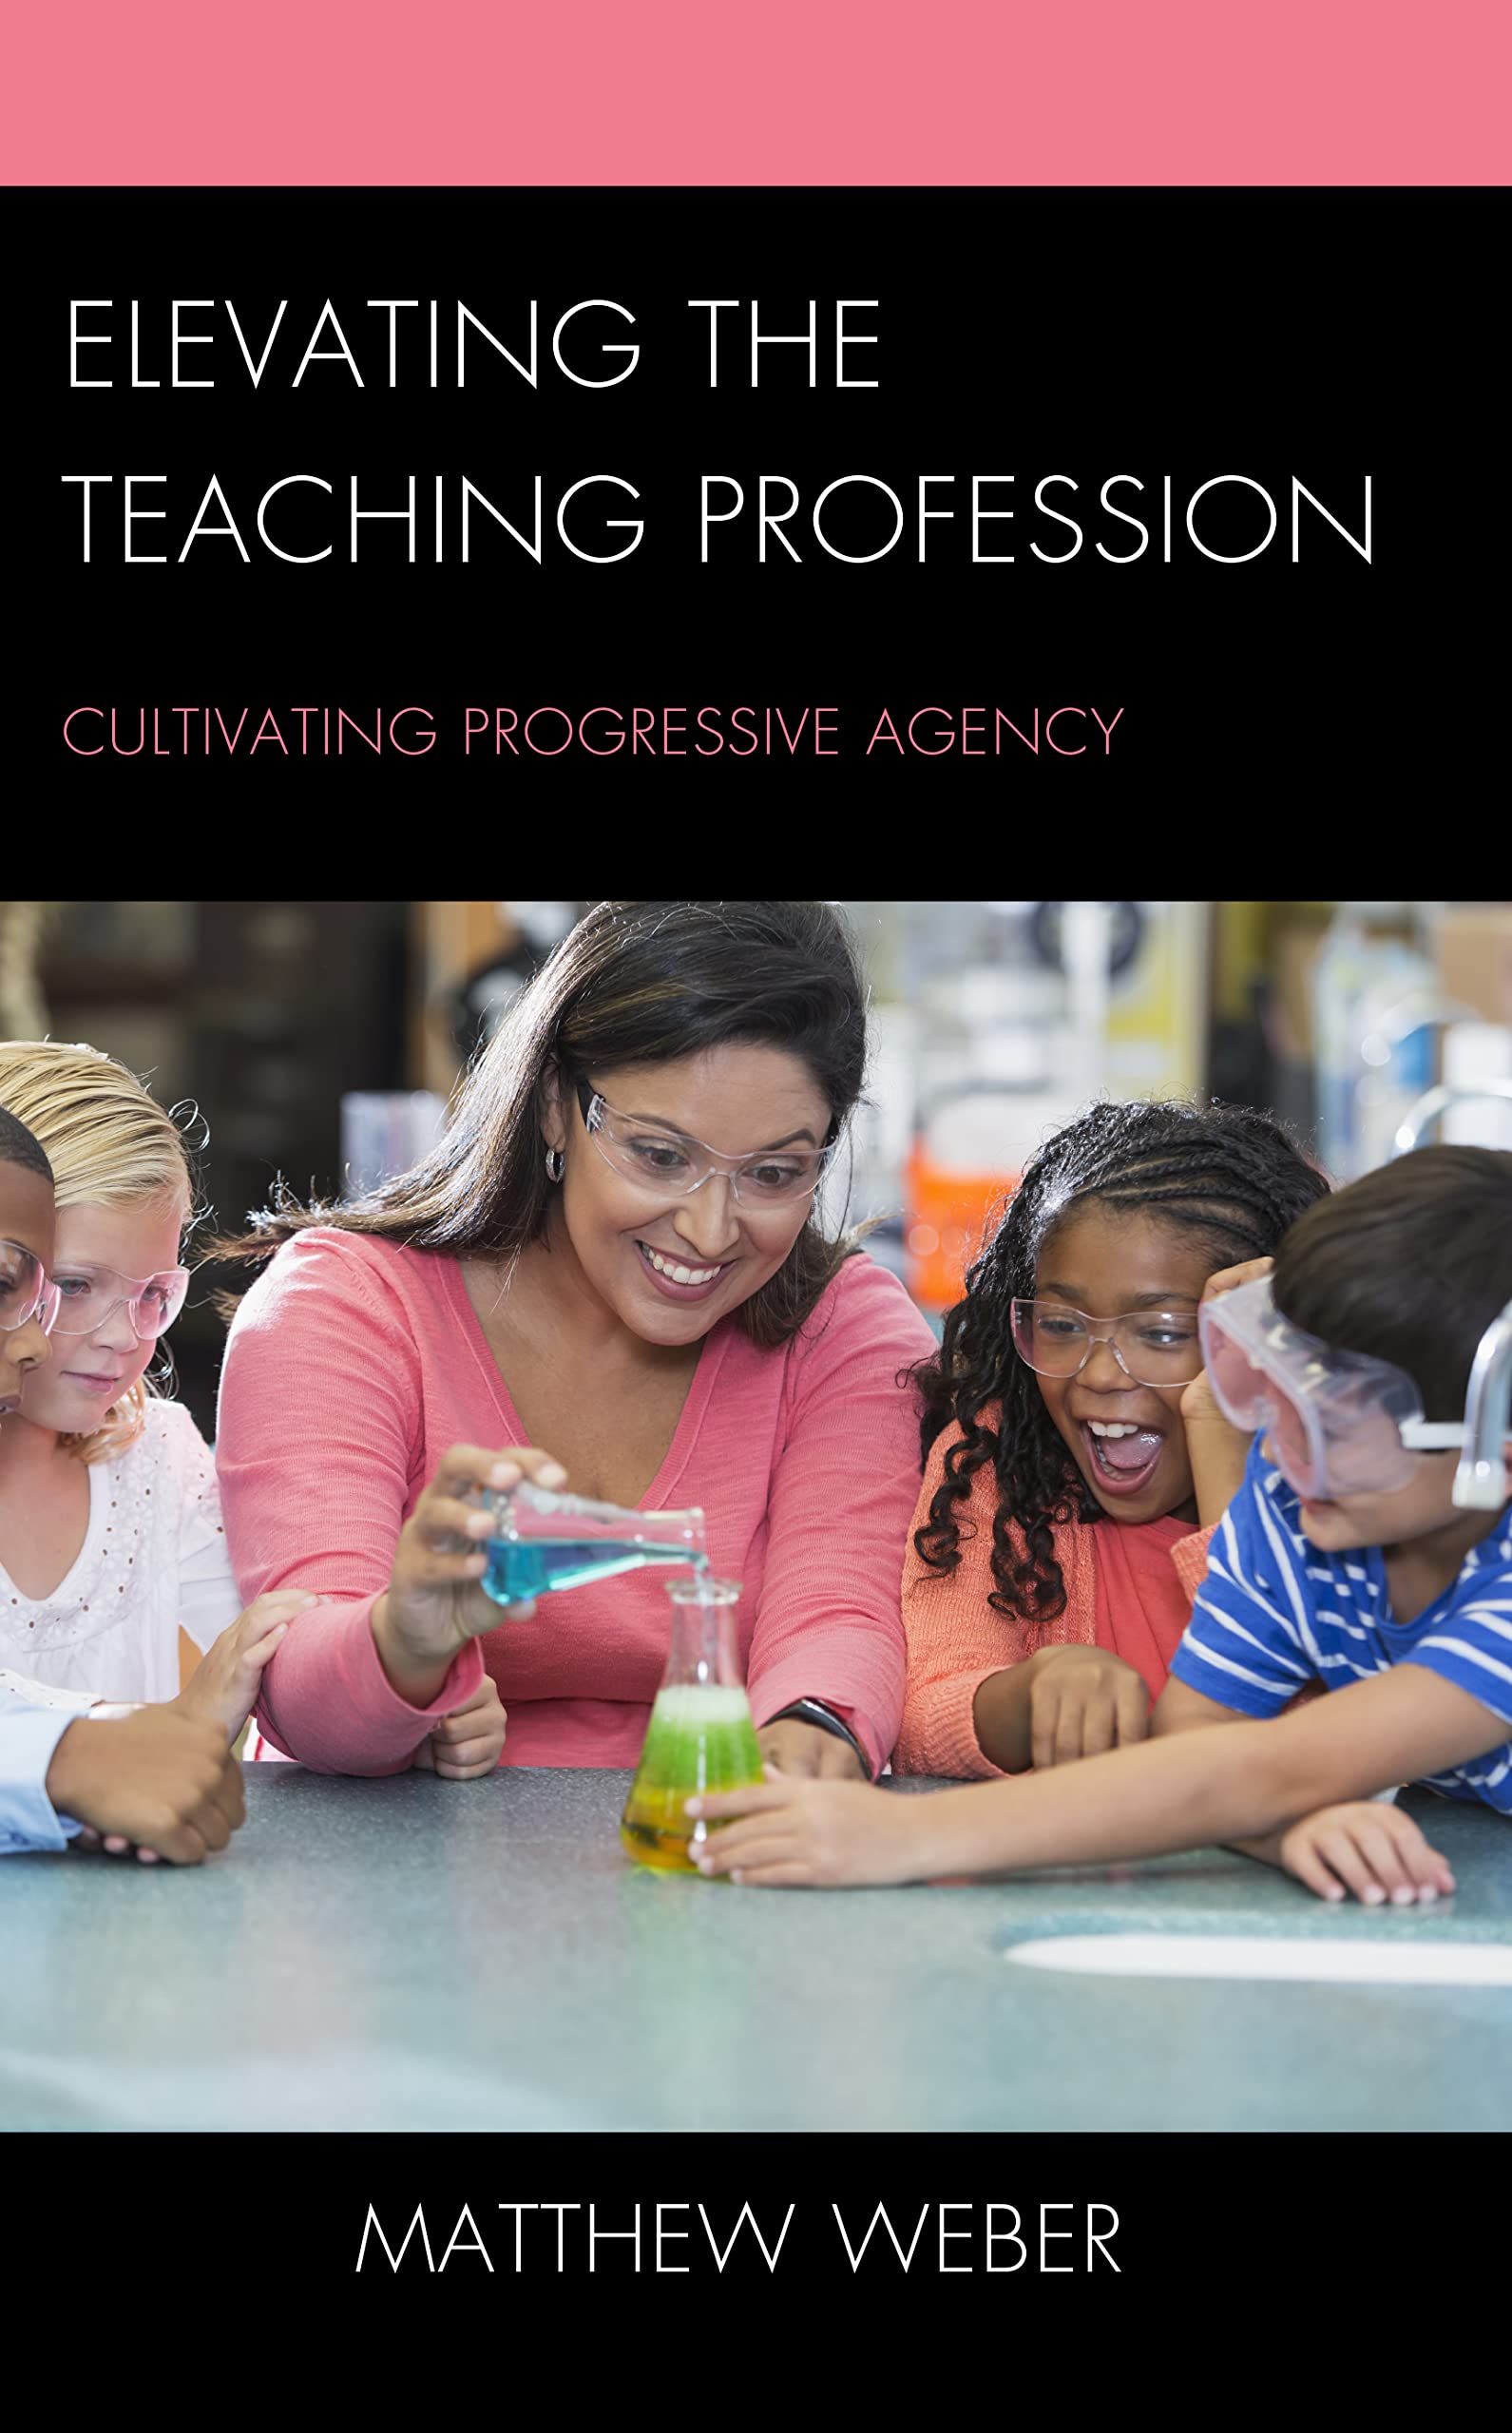 Elevating the Teaching Profession: Cultivating Progressive Agency by Matthew Weber